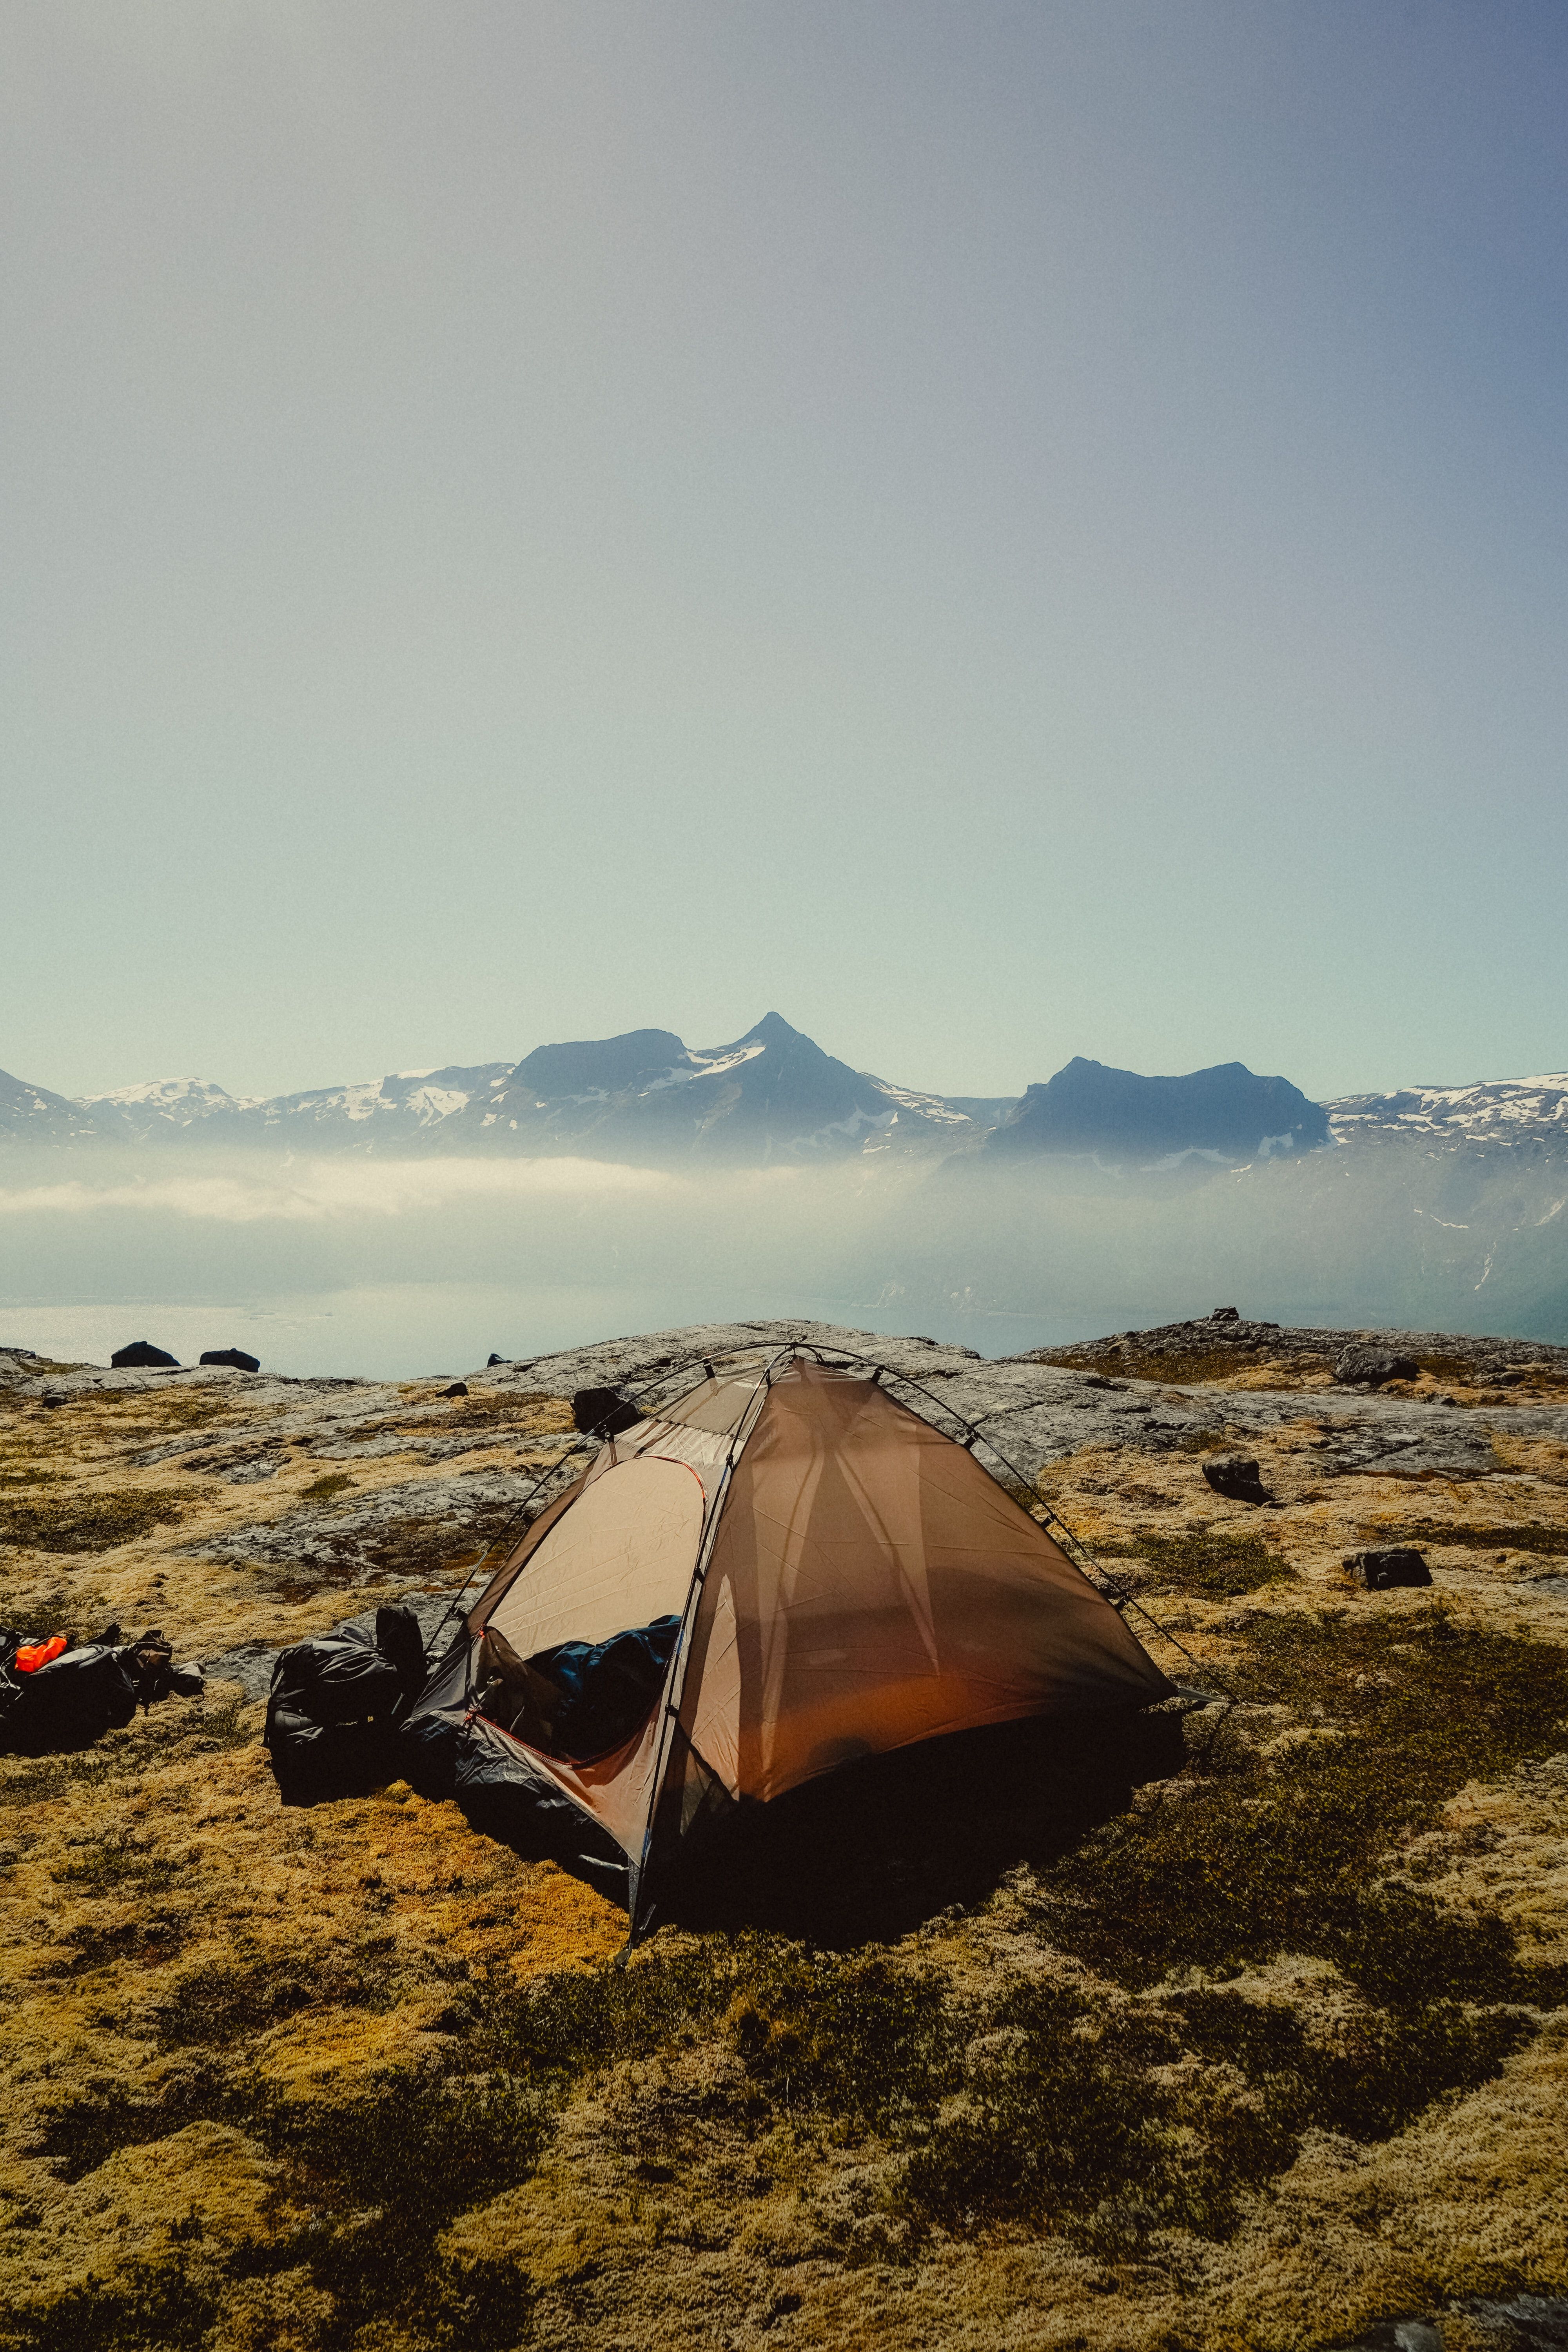 Mobile wallpaper: Fog, Miscellanea, Miscellaneous, Mountains, Campsite, Tent, Camping, 97237 download the picture for free